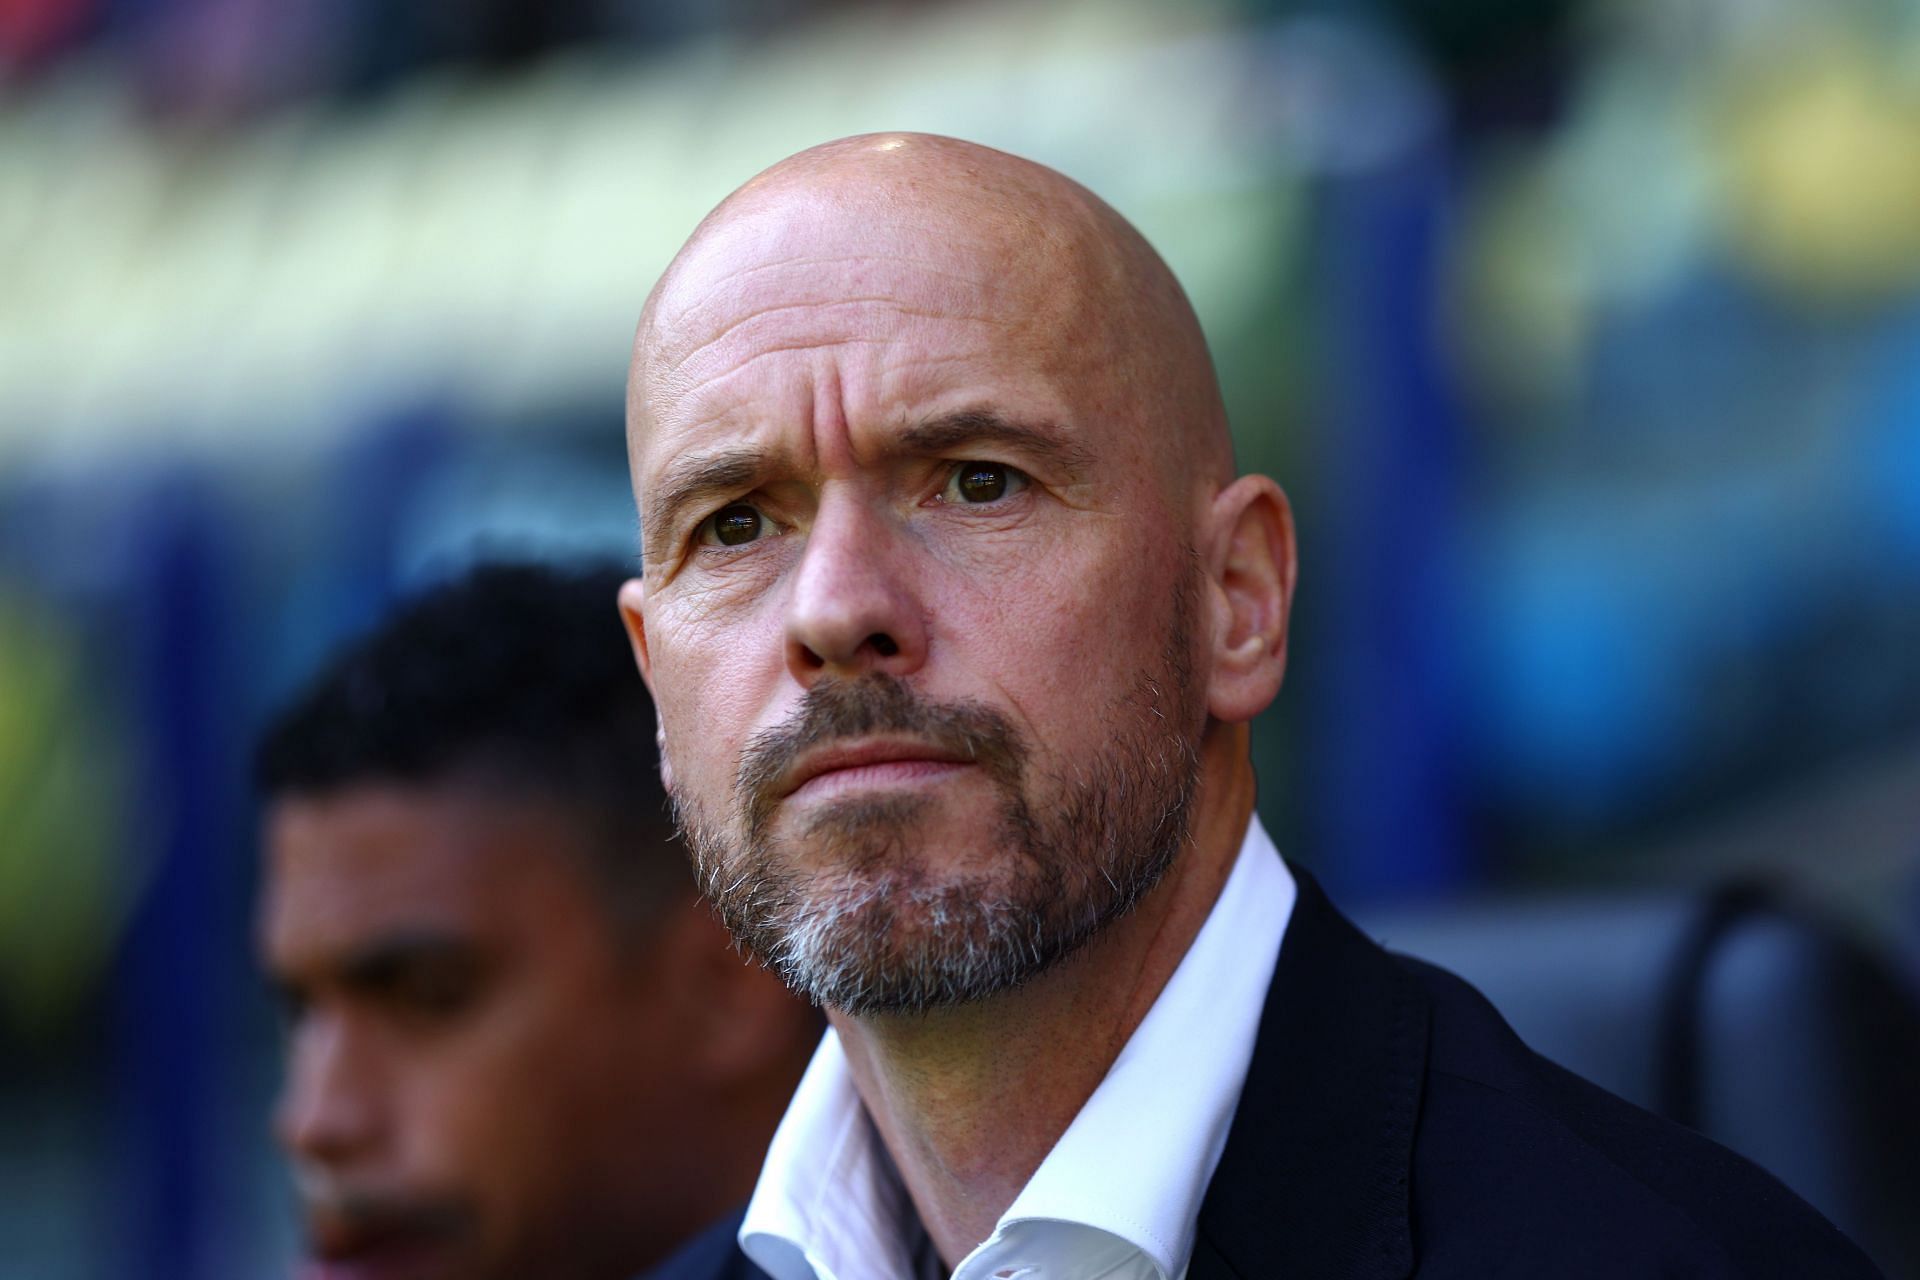 Erik ten Hag will attempt to get Manchester United back on track